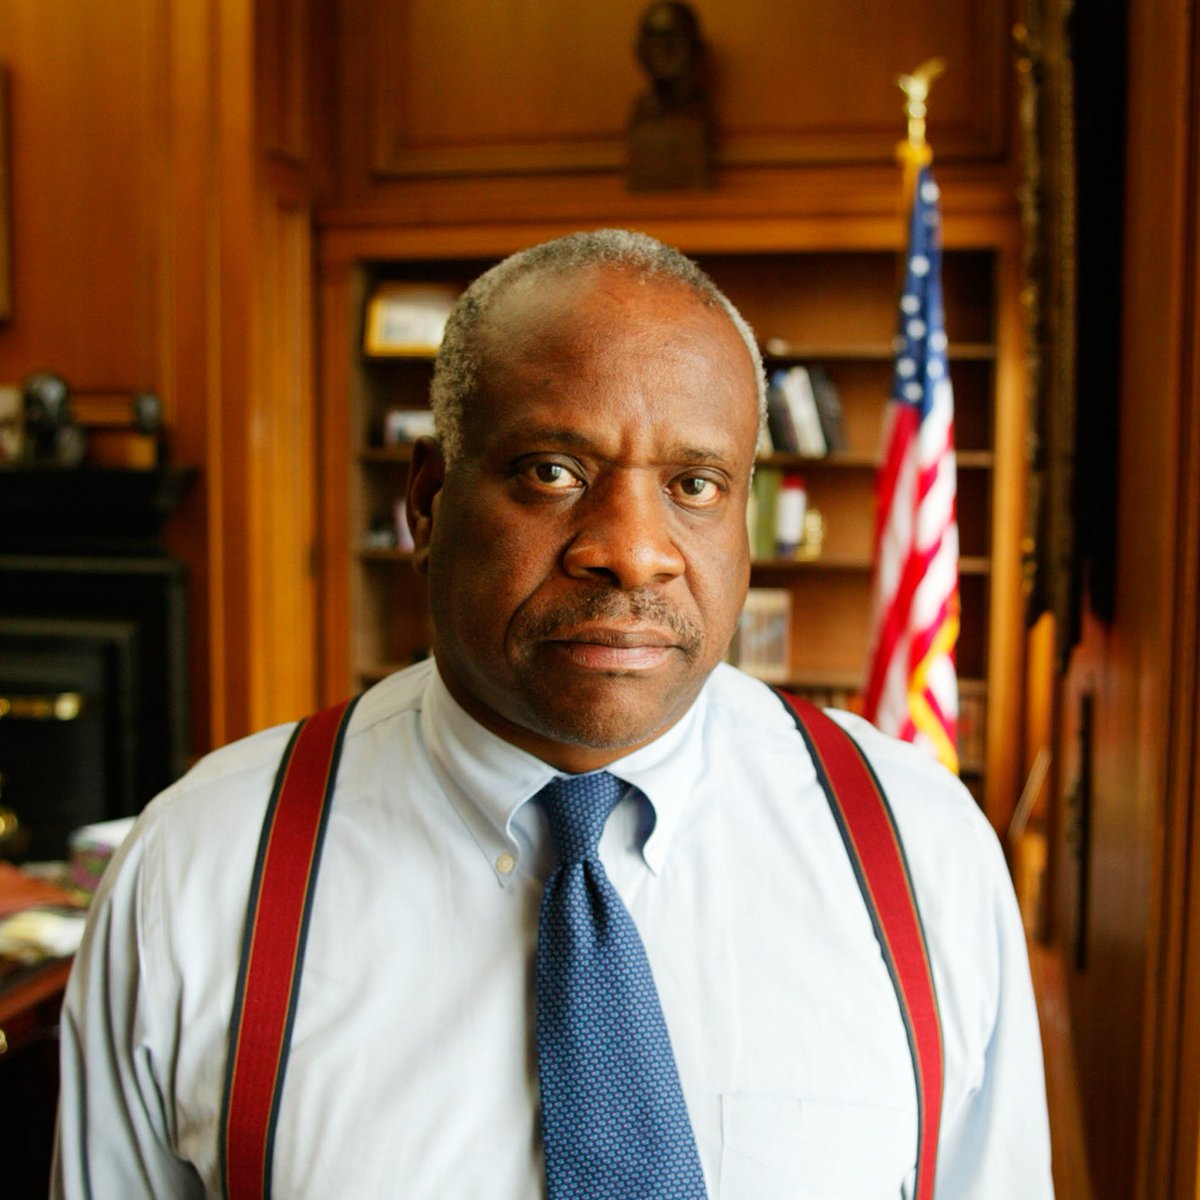 🚨BREAKING: Justice Clarence Thomas just said that the E. Jean Carroll case is election interference orchestrated by the Democrats. Do you agree? Yes or No